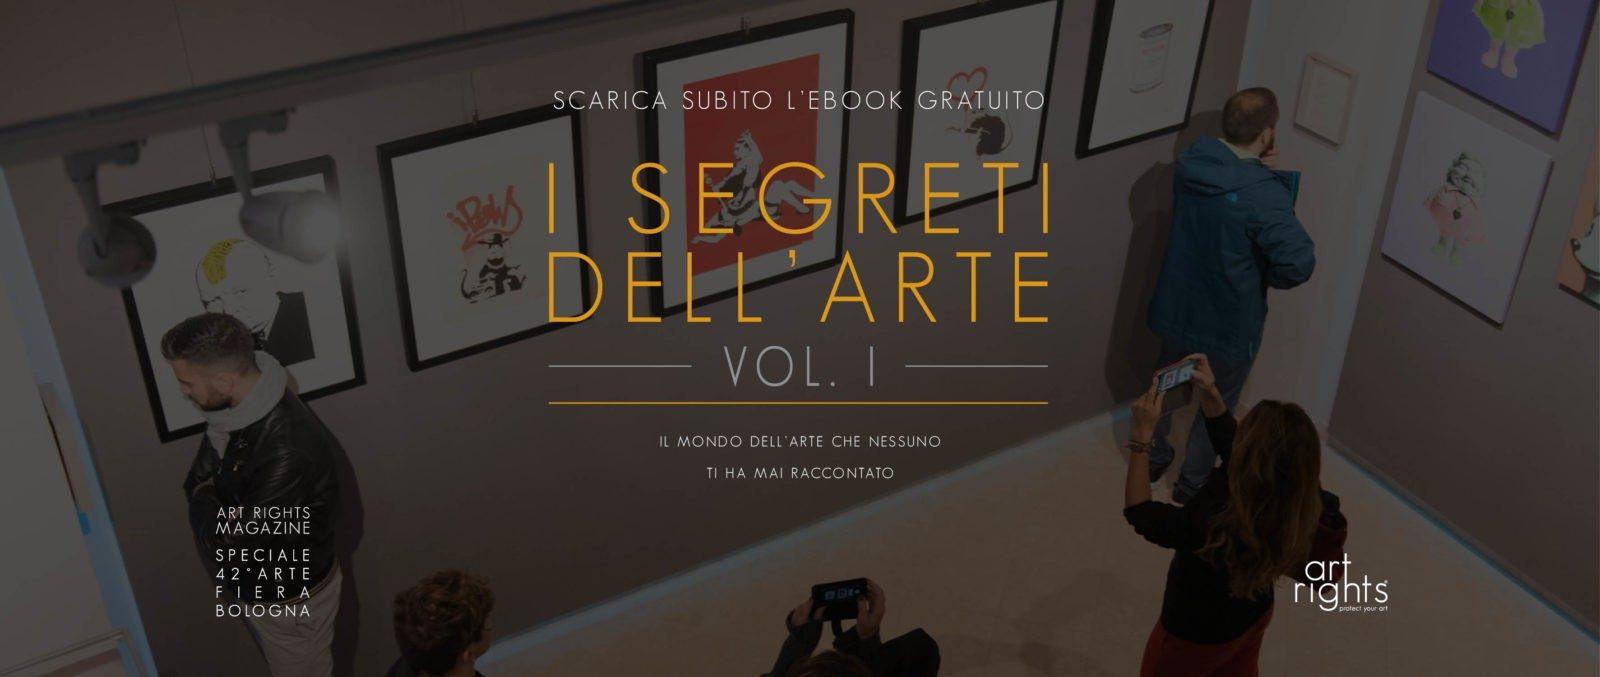 Discover the Secrets of the Art told by gallerists. Download the FREE Ebook!!